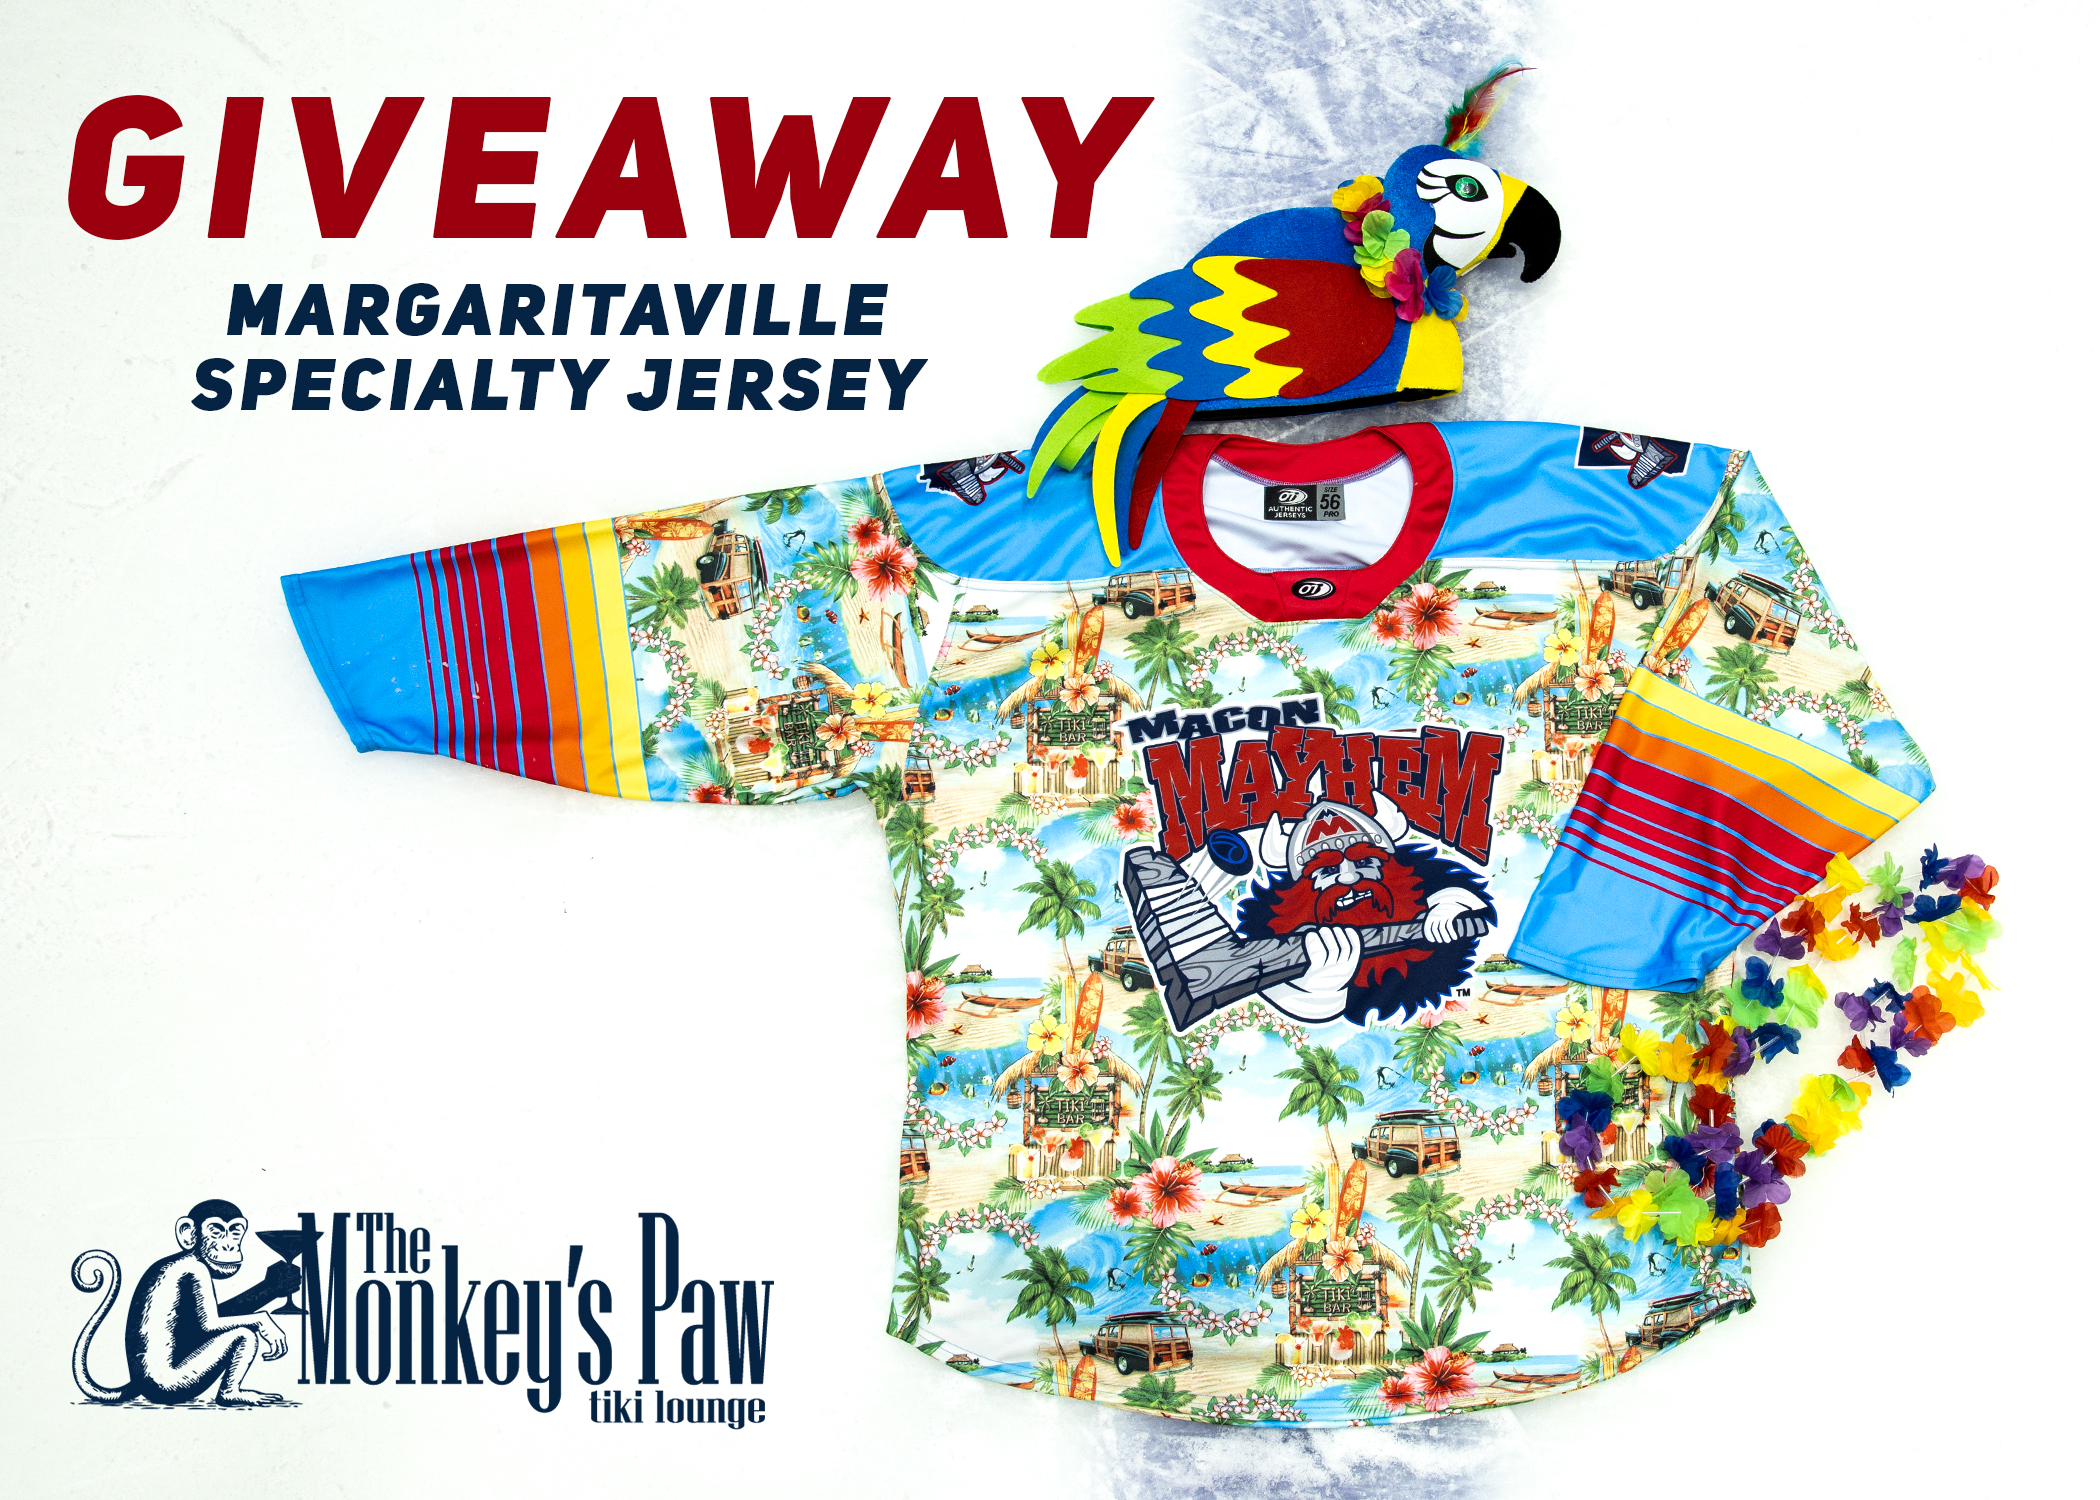 Macon Mayhem on X: G I V E A W A Y !! Here is your chance to win